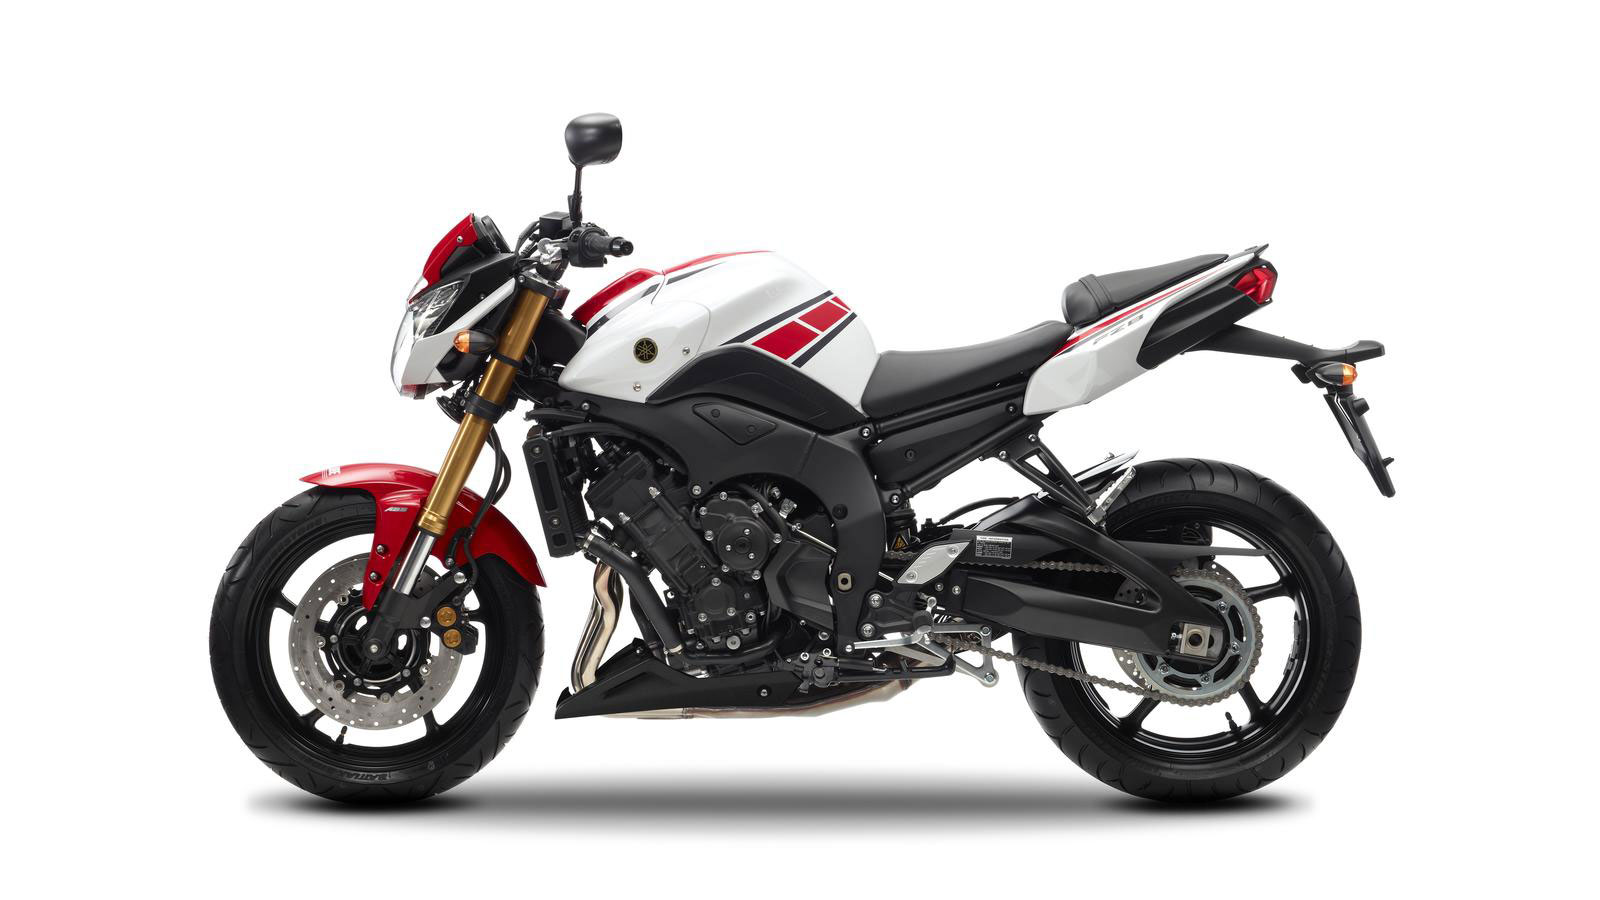 2012 Yamaha FZ8 - Picture 418955 | motorcycle review @ Top 